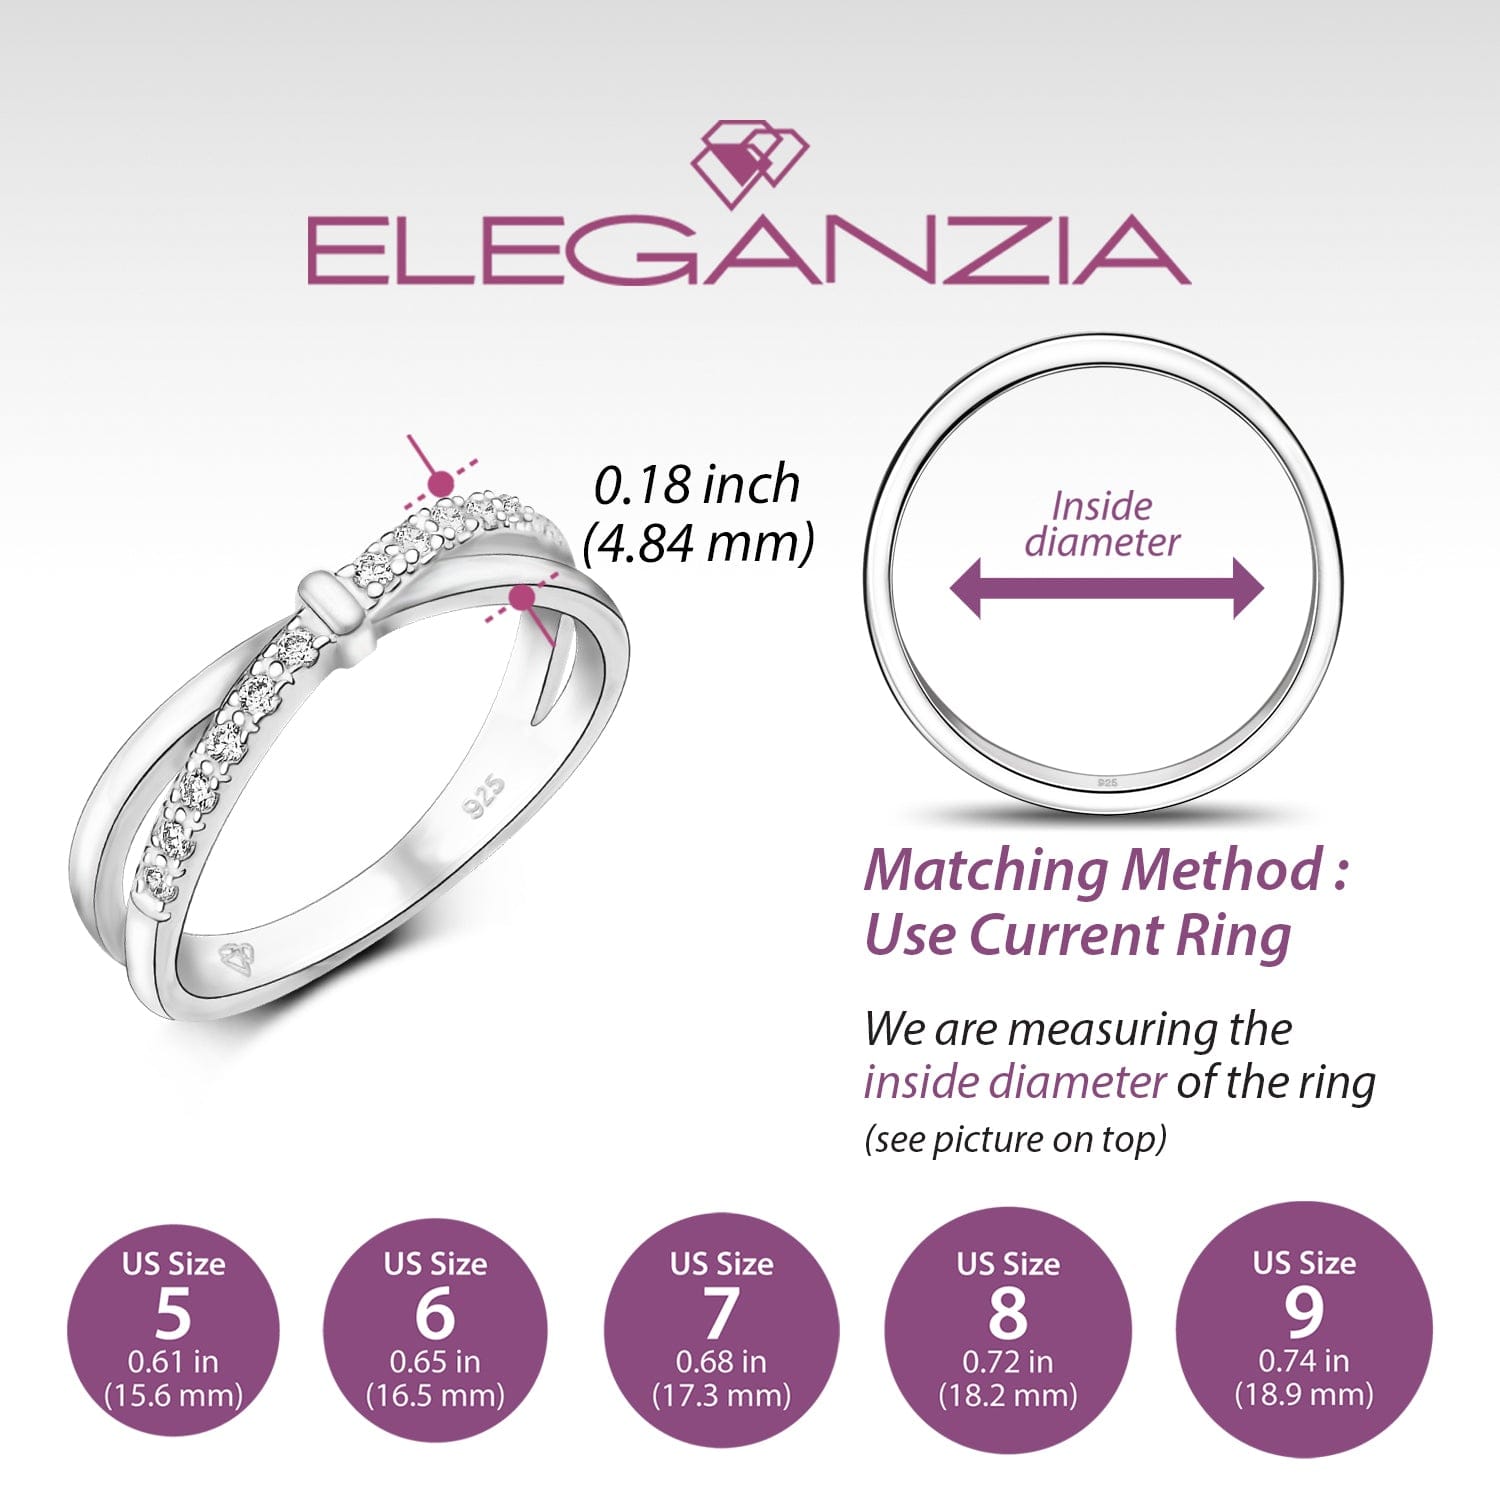 Move Link Diamond Solitaire Ring in Pink Gold | Messika 13747-PG